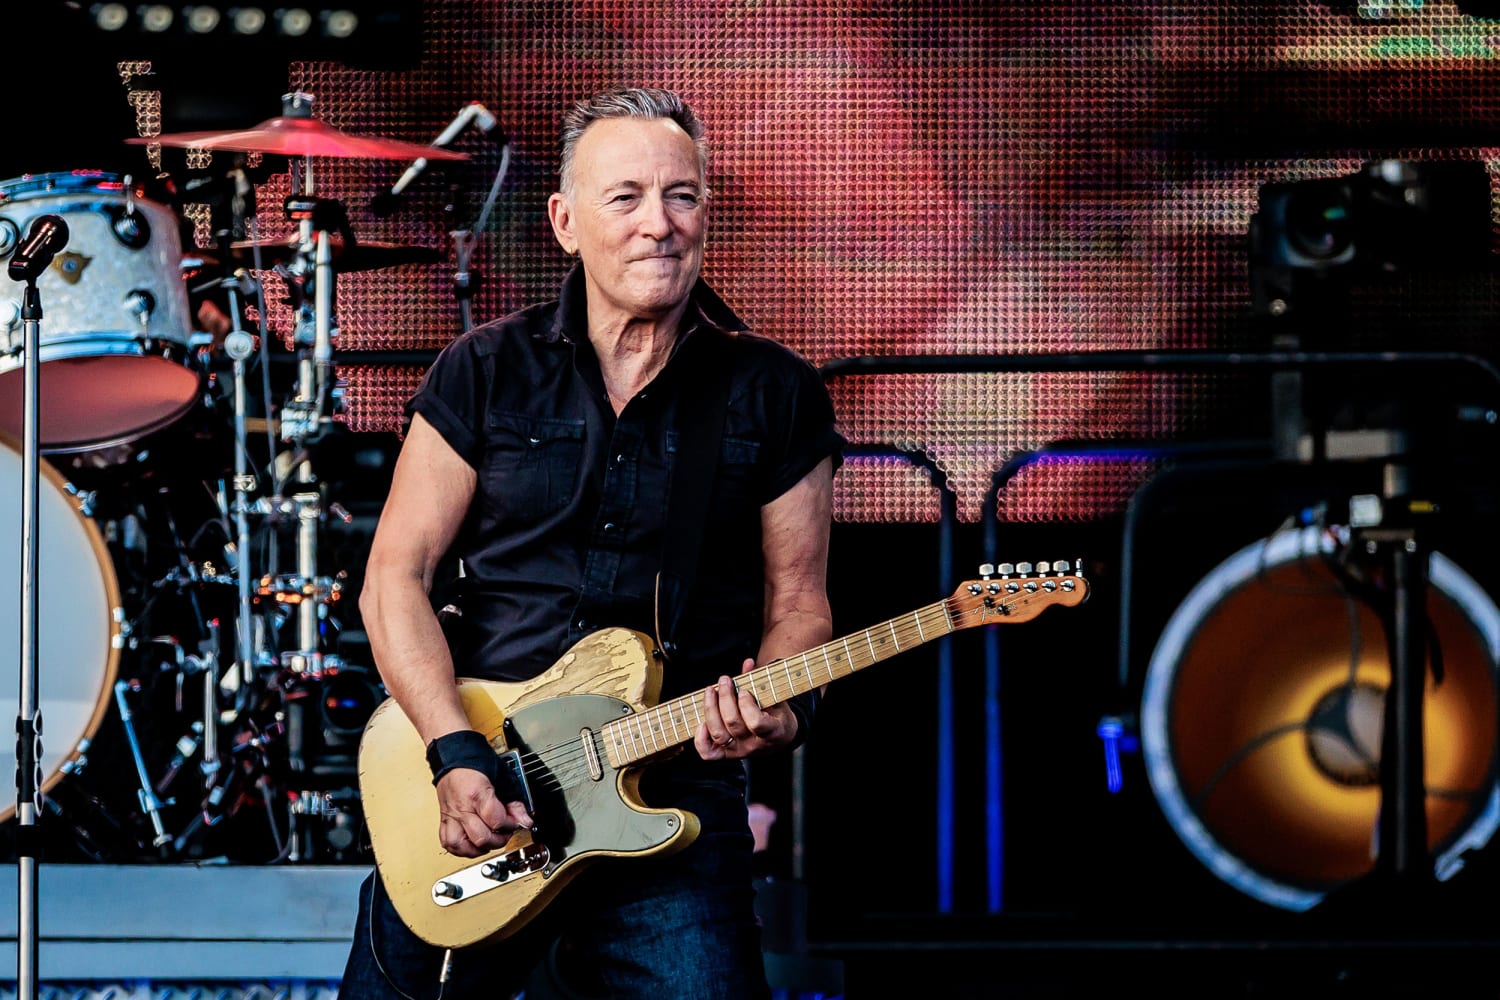 Bruce Springsteen postpones a couple of concerts due to illness 